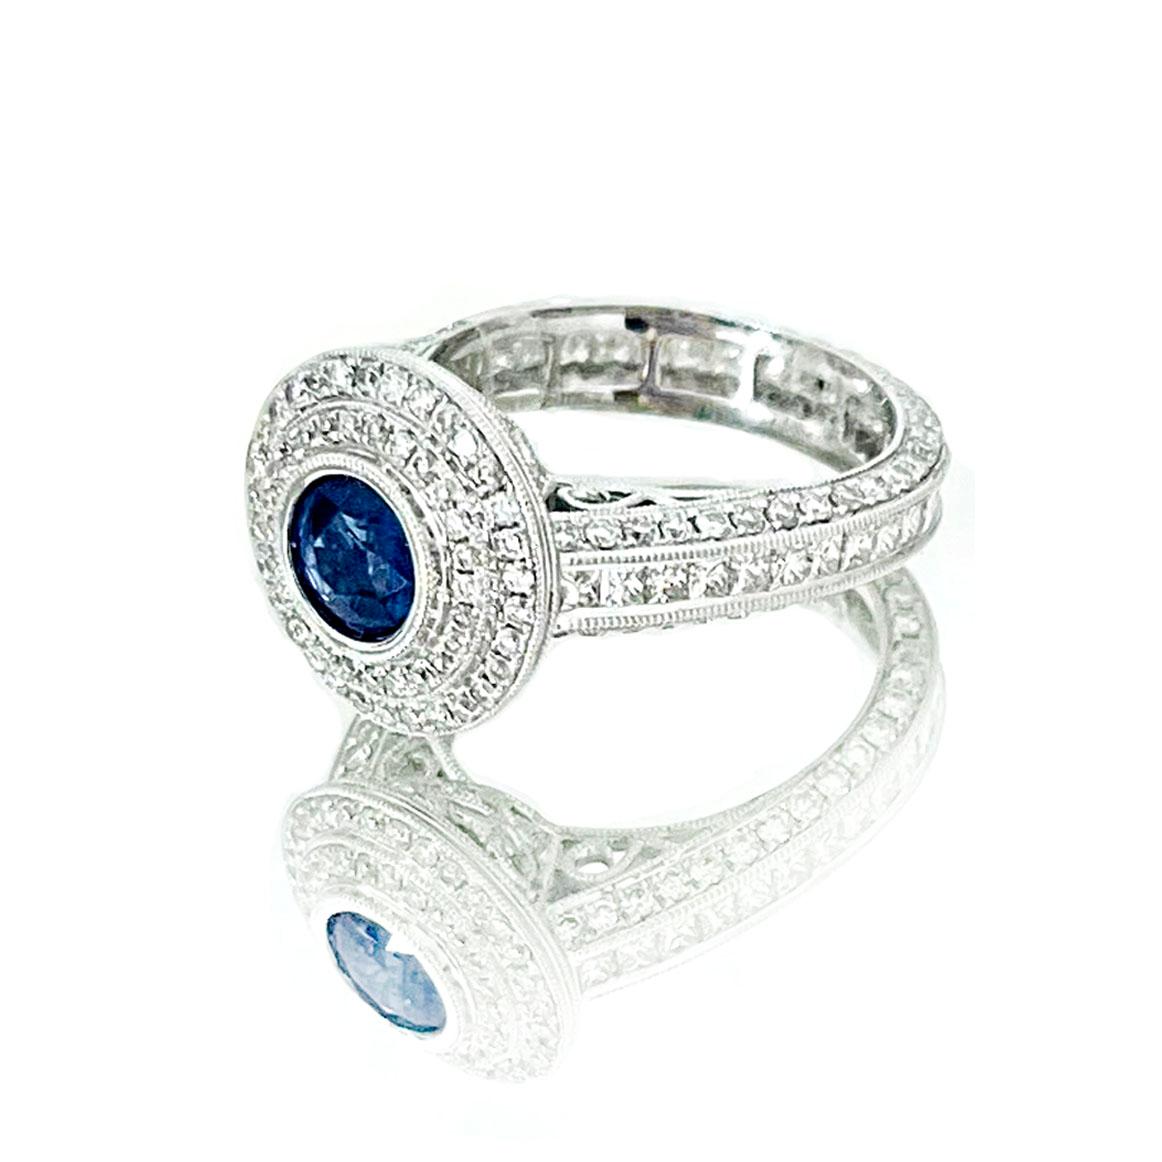 Produced by award winning Italian designer Stefano Vitolo. Stefano creates custom artisanal one of a kind jewelry with excellent gemstones in a truly old world Italian craftmanship.

Gemstones: Diamonds 2.12 ctw, Blue Sapphire 0.90 ctw
Ring width: